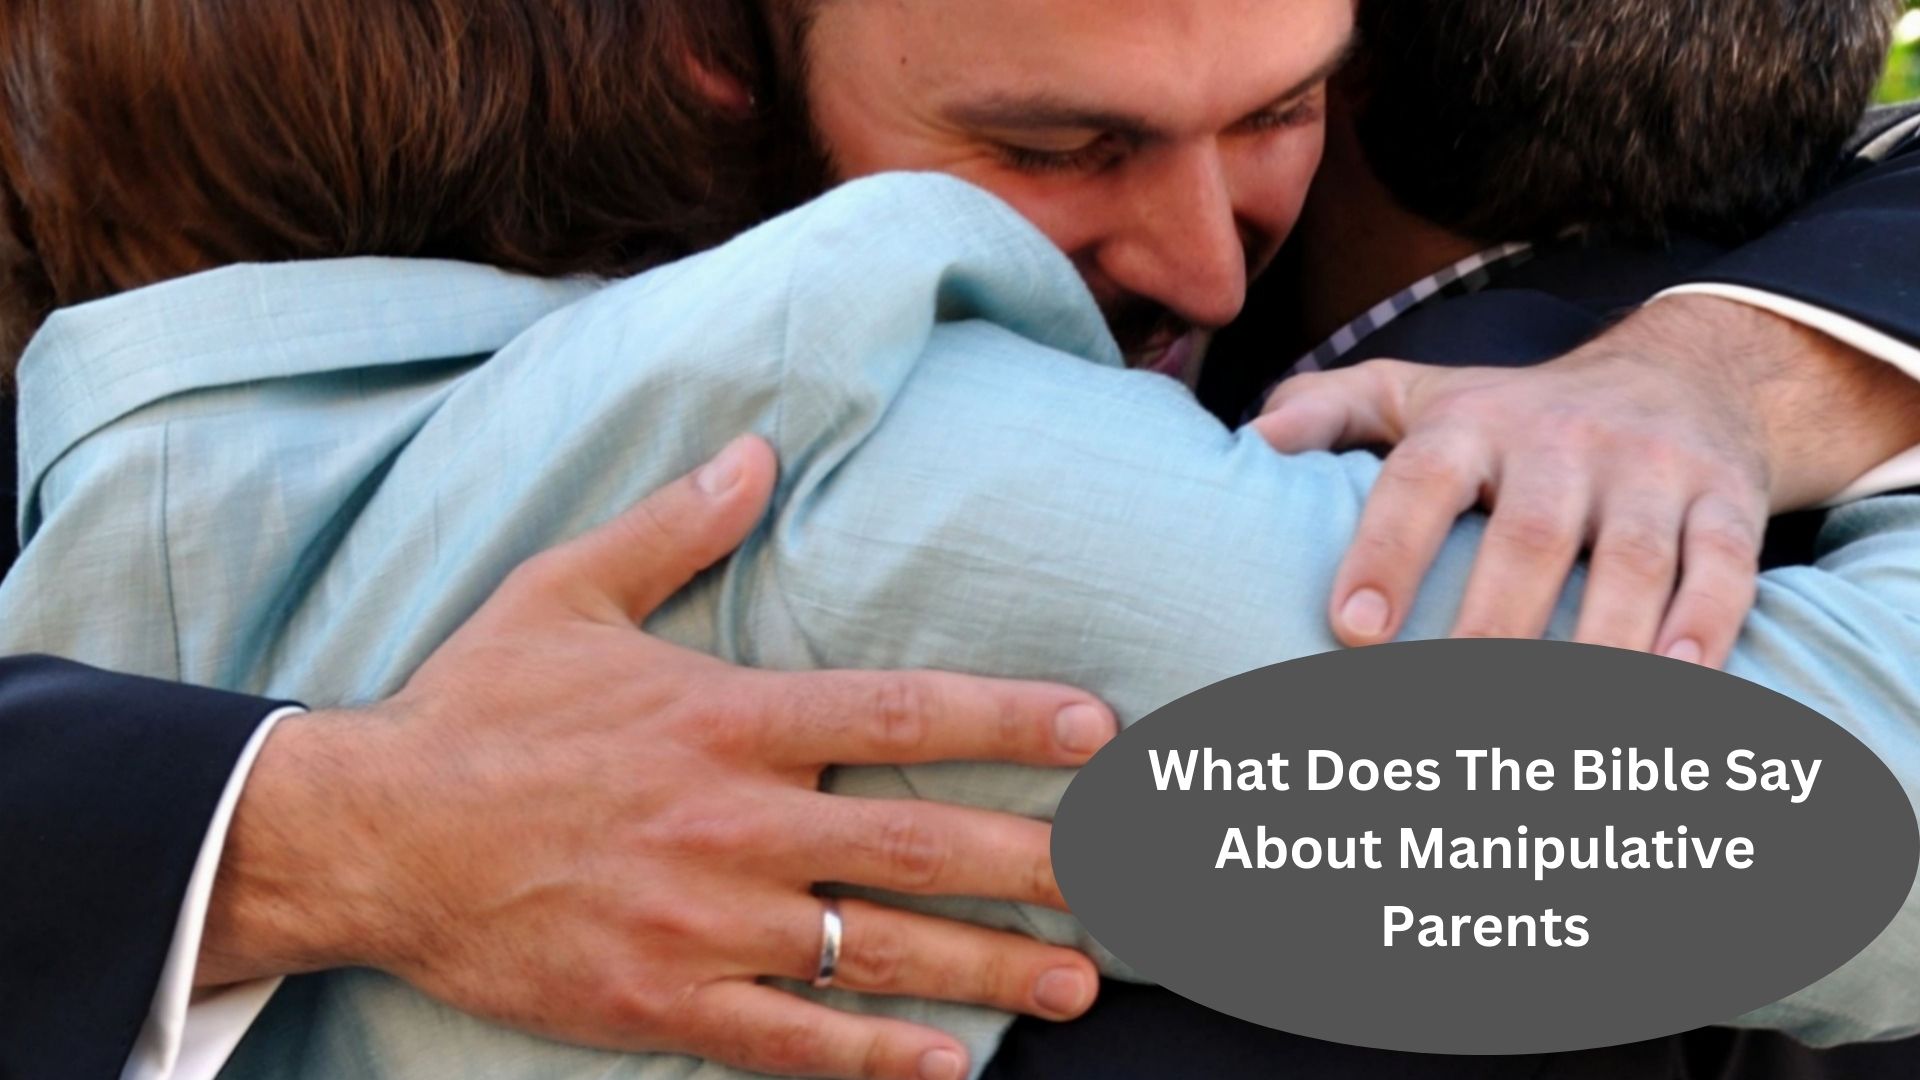 What Does The Bible Say About Manipulative Parents